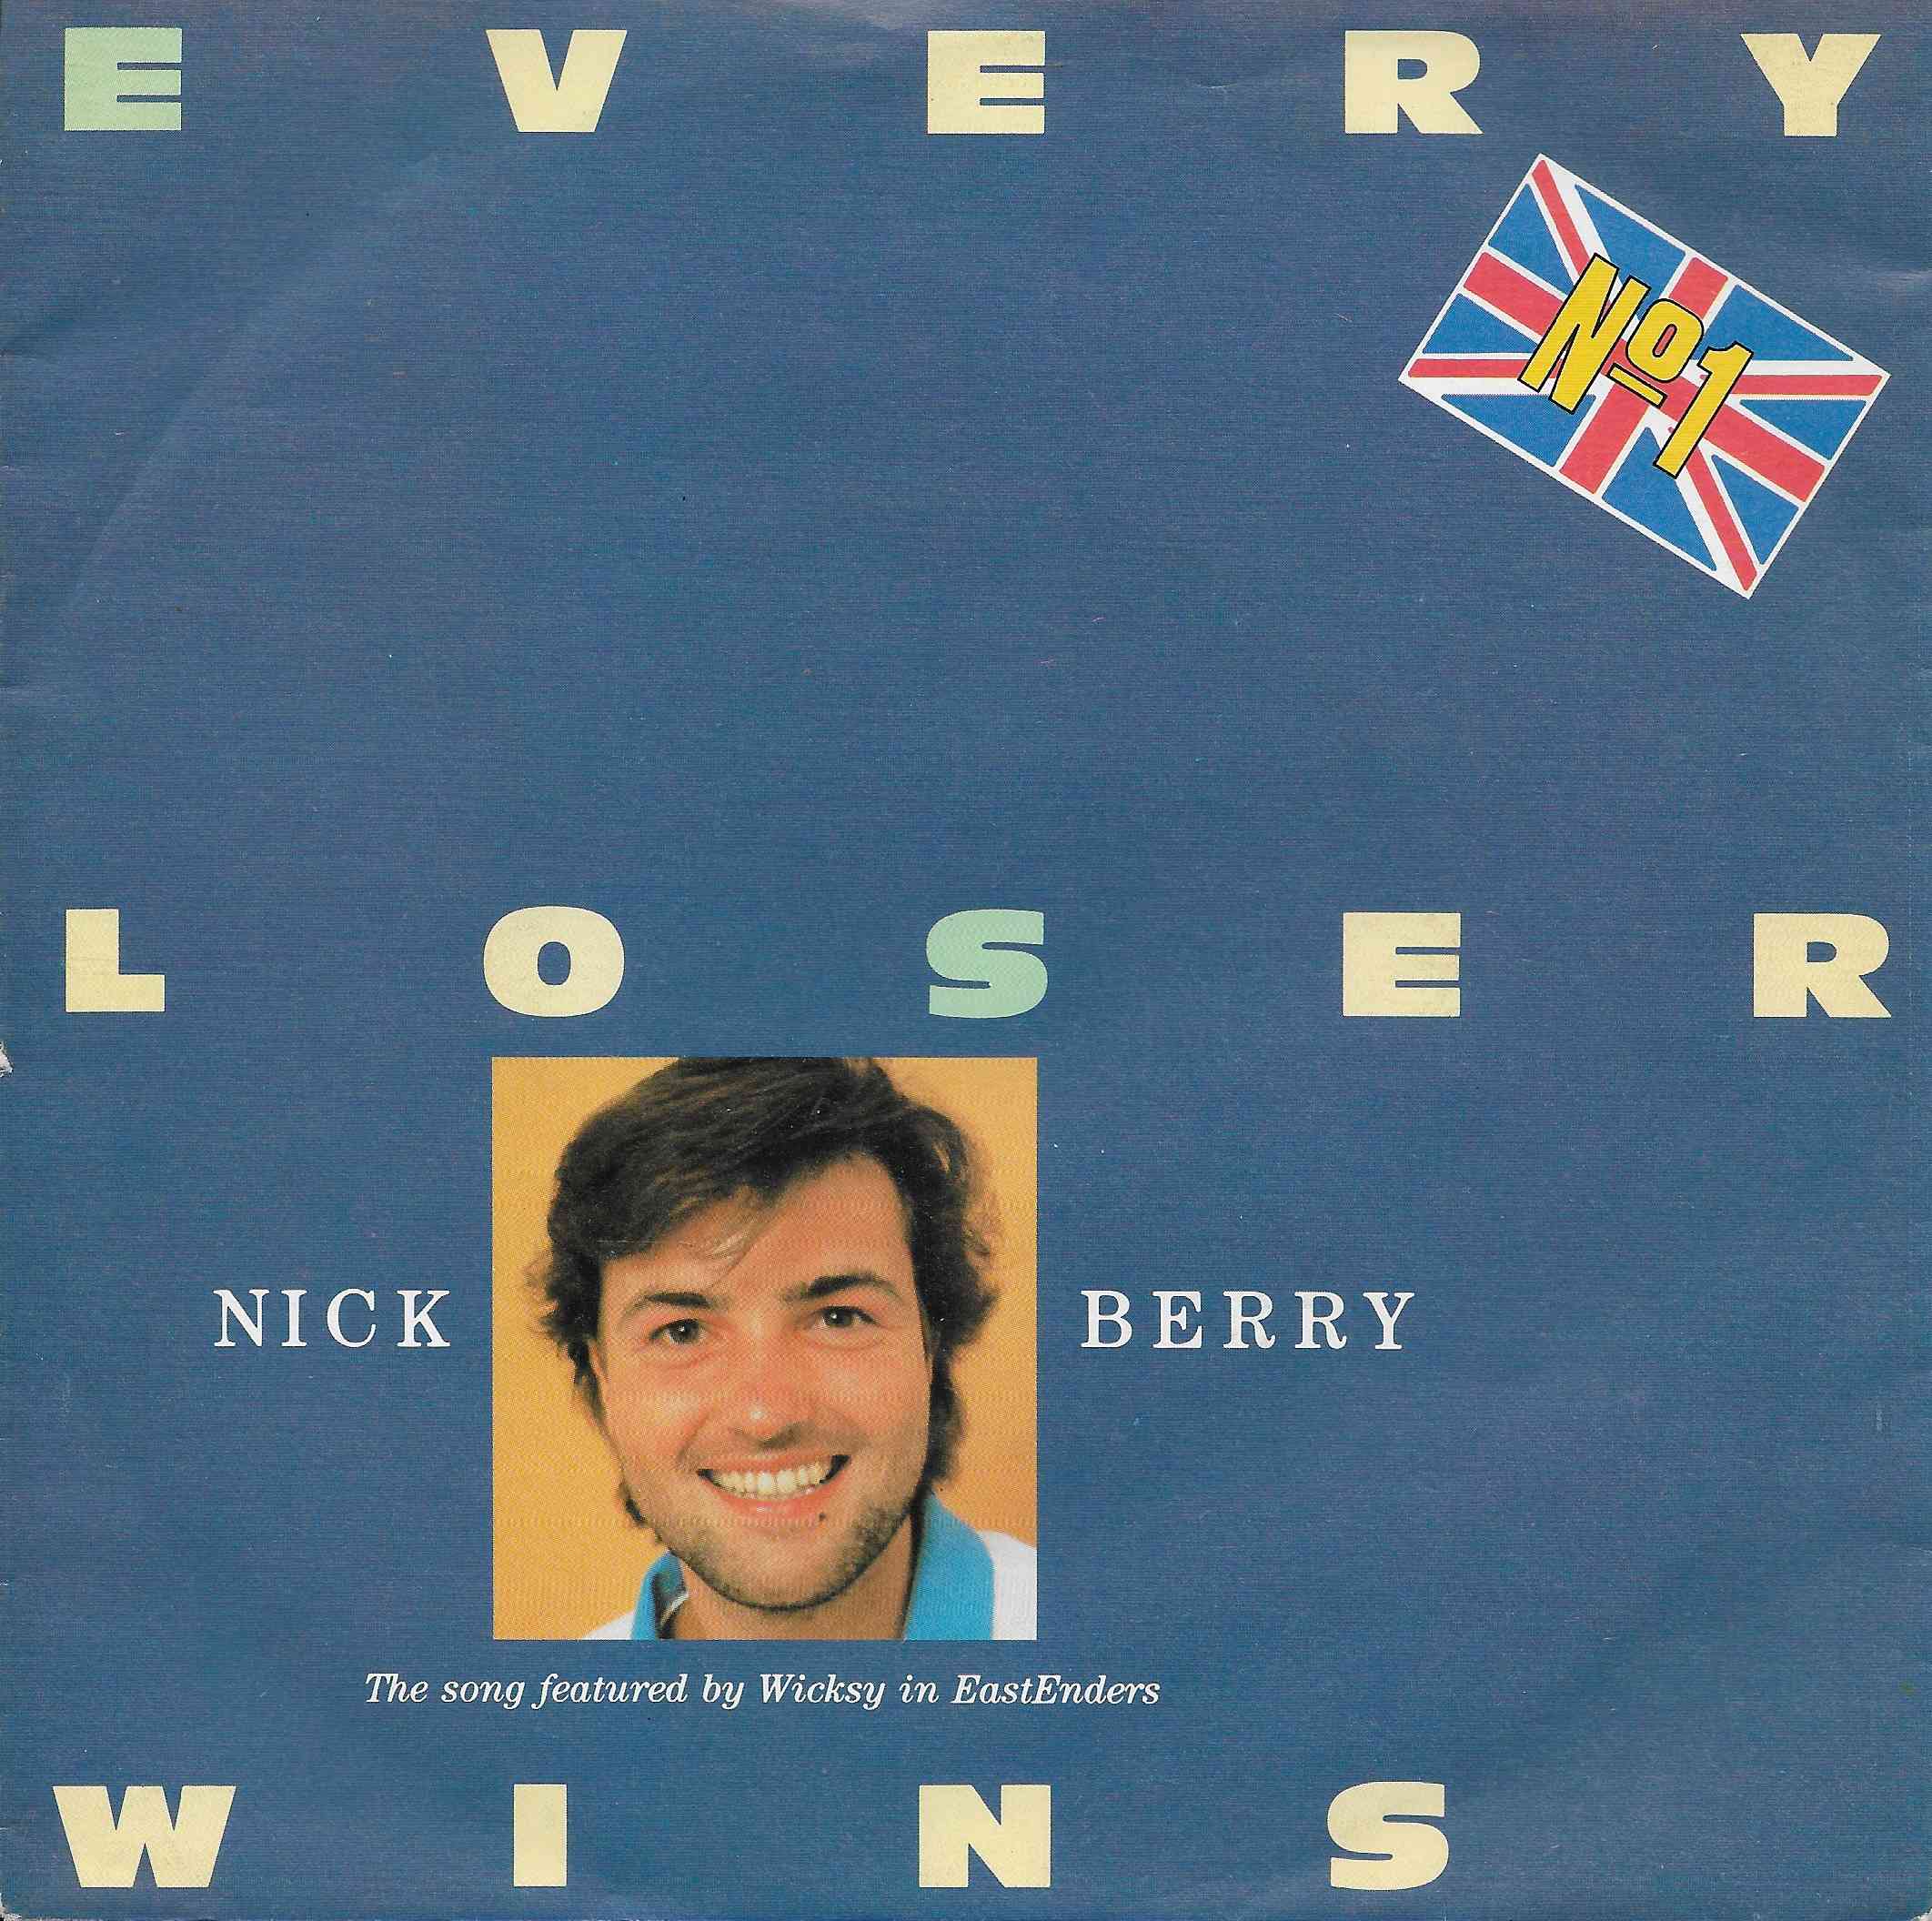 Picture of INT 113.011 Every loser wins (German import) by artist Simon May / Stewart and Bradley James from the BBC singles - Records and Tapes library